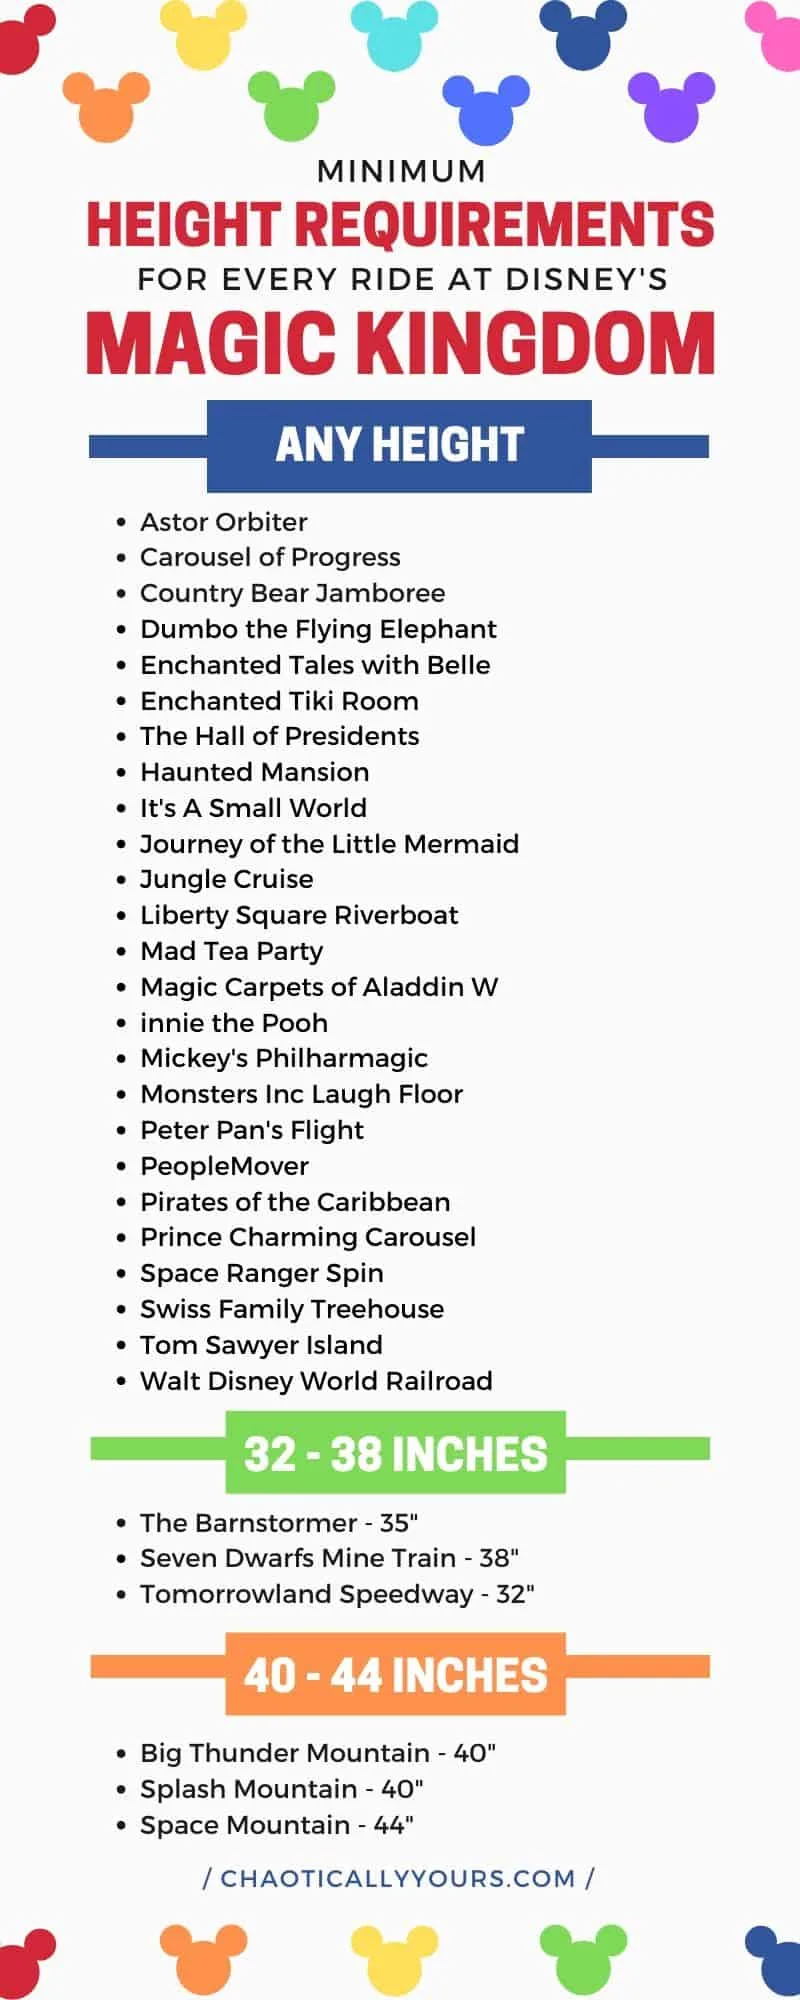 List of Disney Height Requirements for Rides in the Magic Kingdom